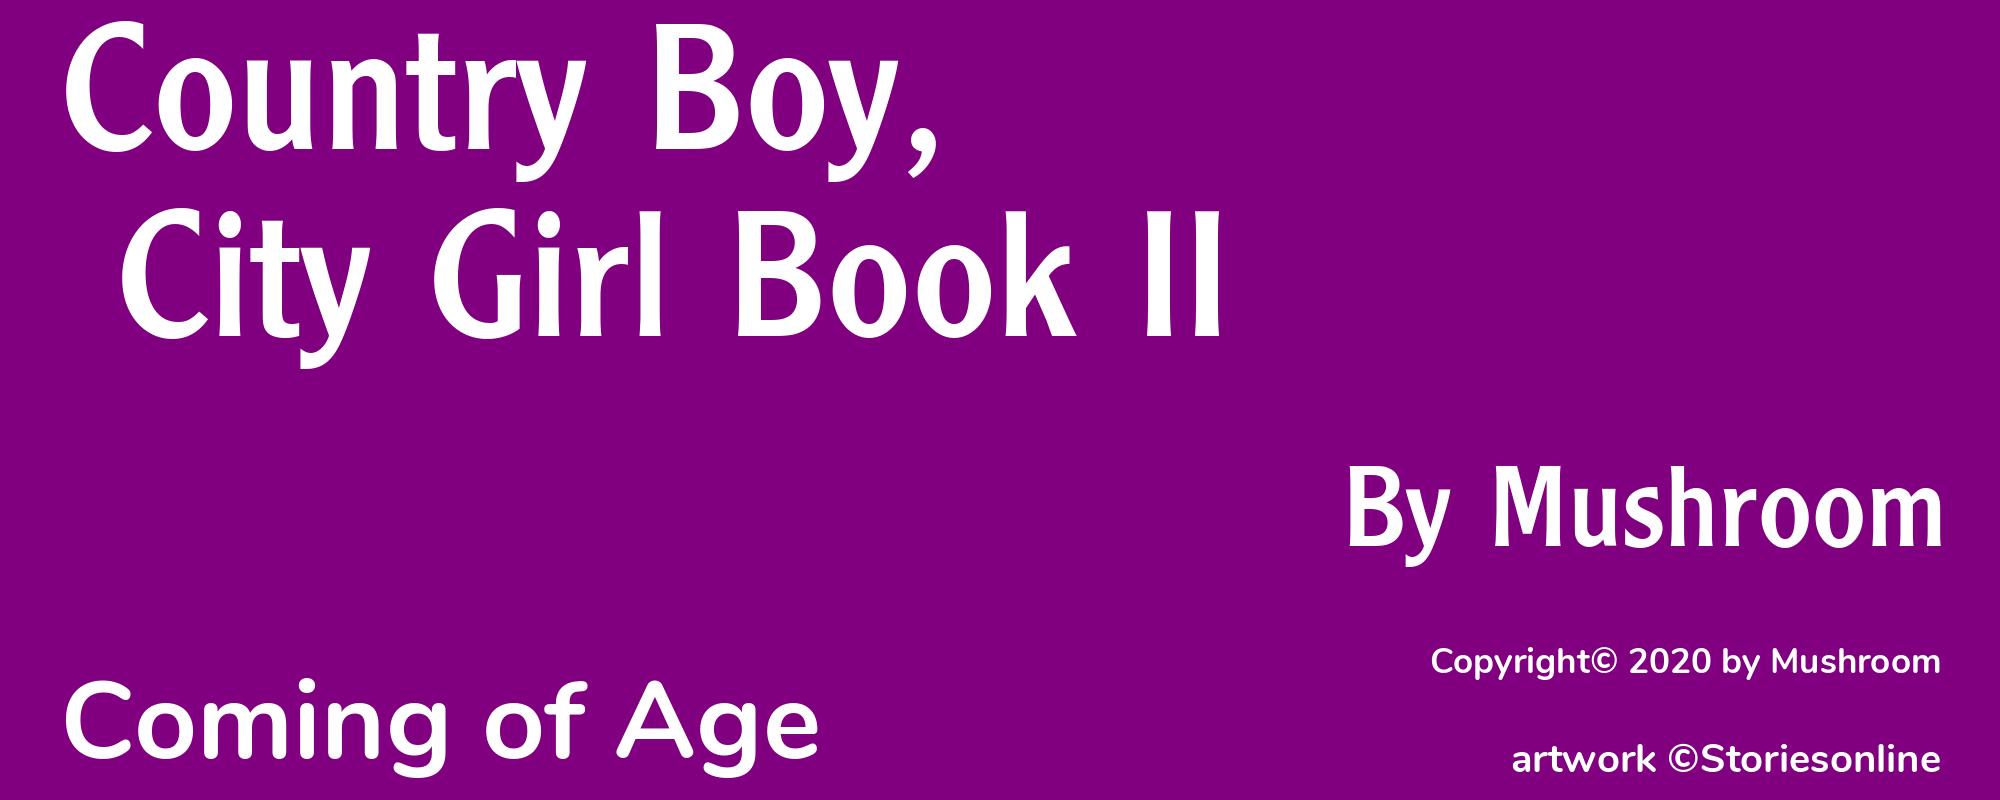 Country Boy, City Girl Book II - Cover